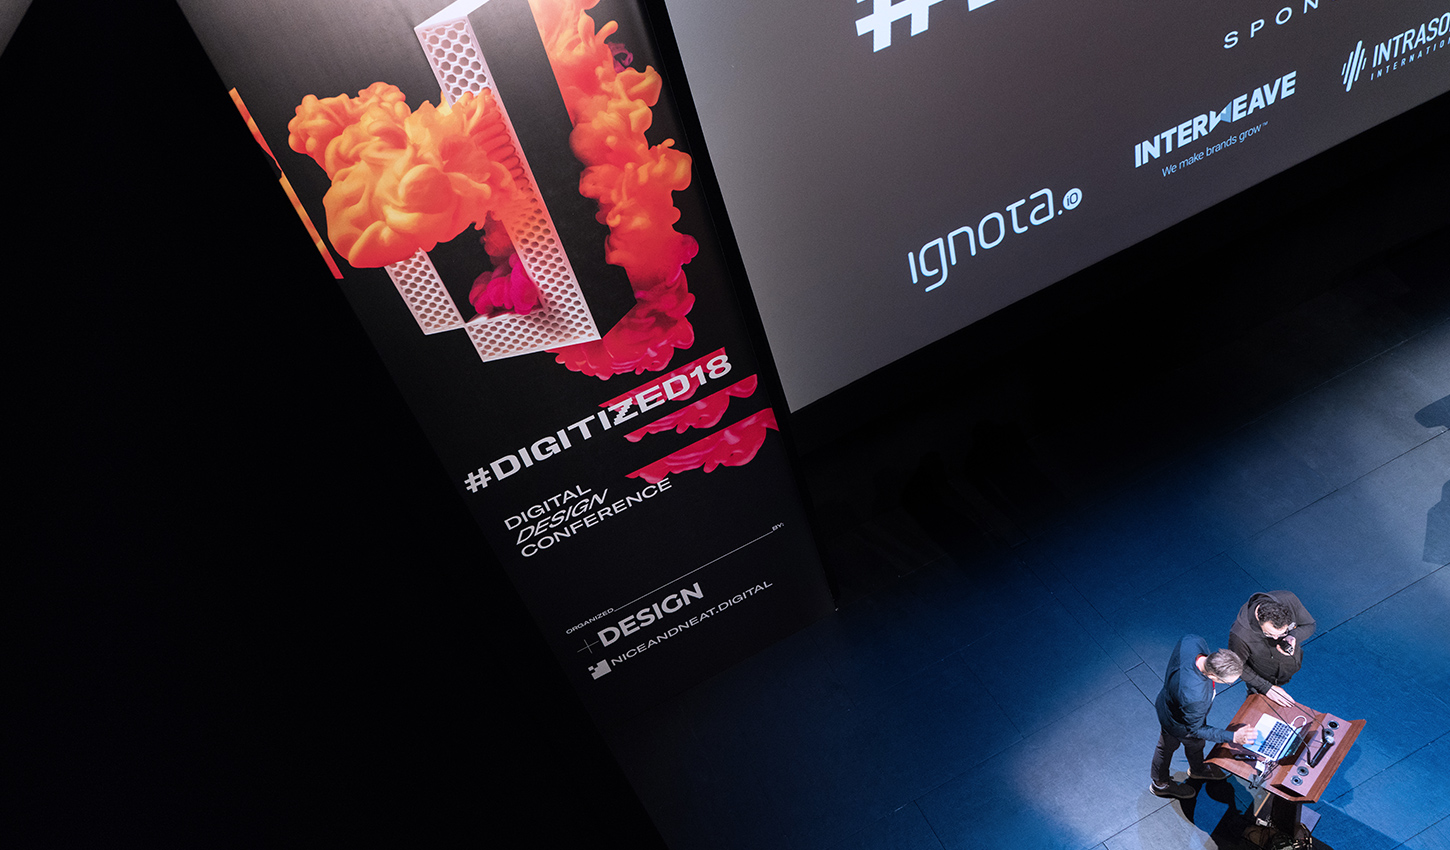 Luminous Design Group Created the Visual Identity for Digitized ’18